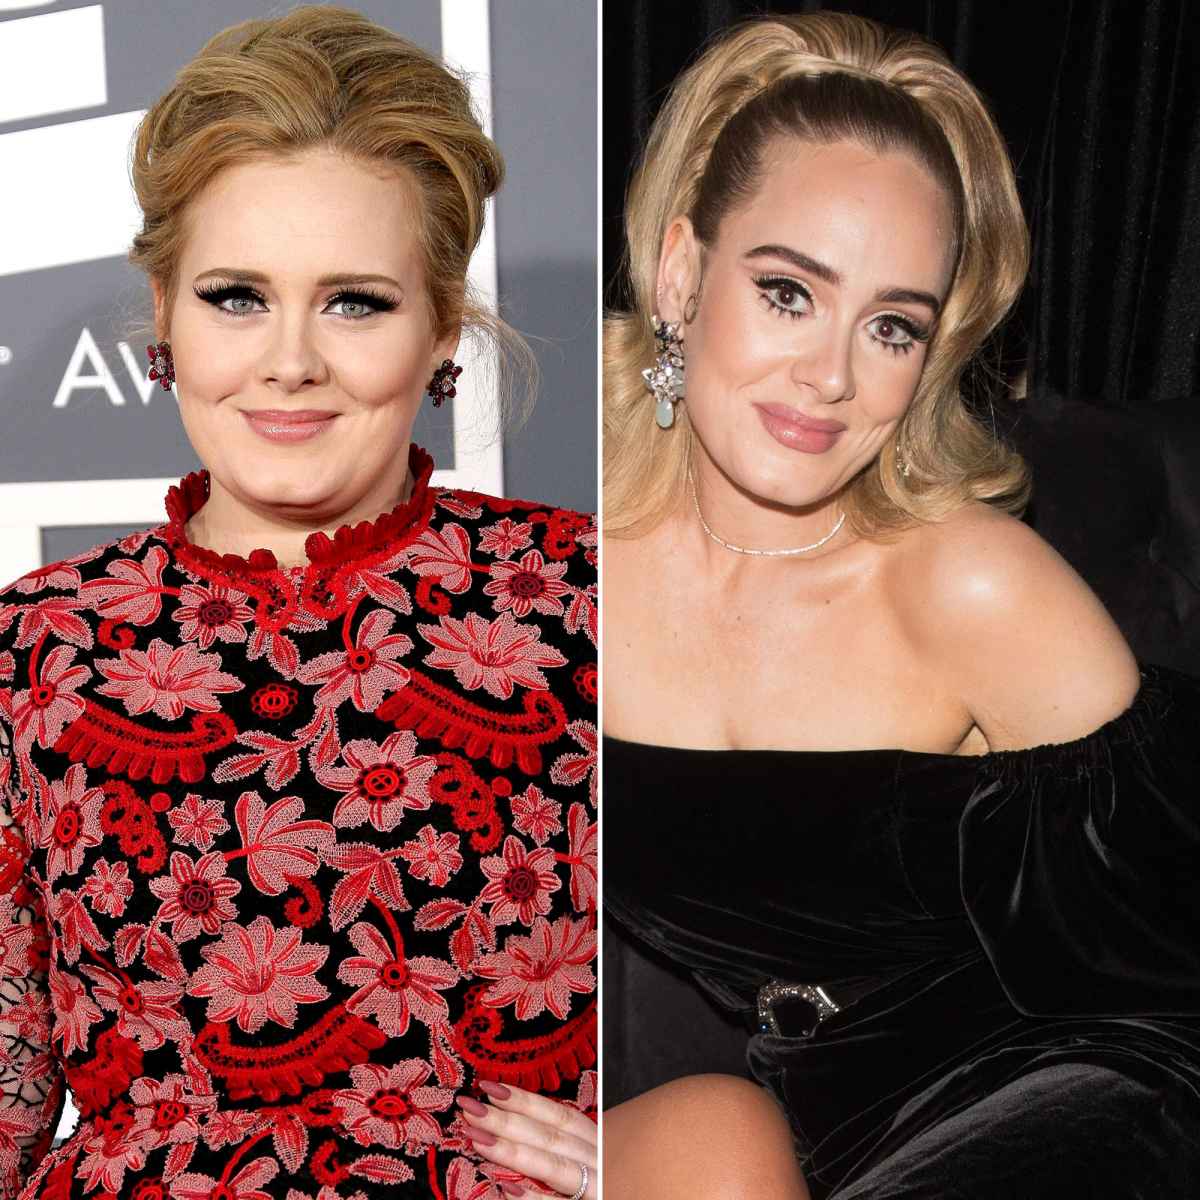 Why the Latest Photos of Adele Have Fans Concerned